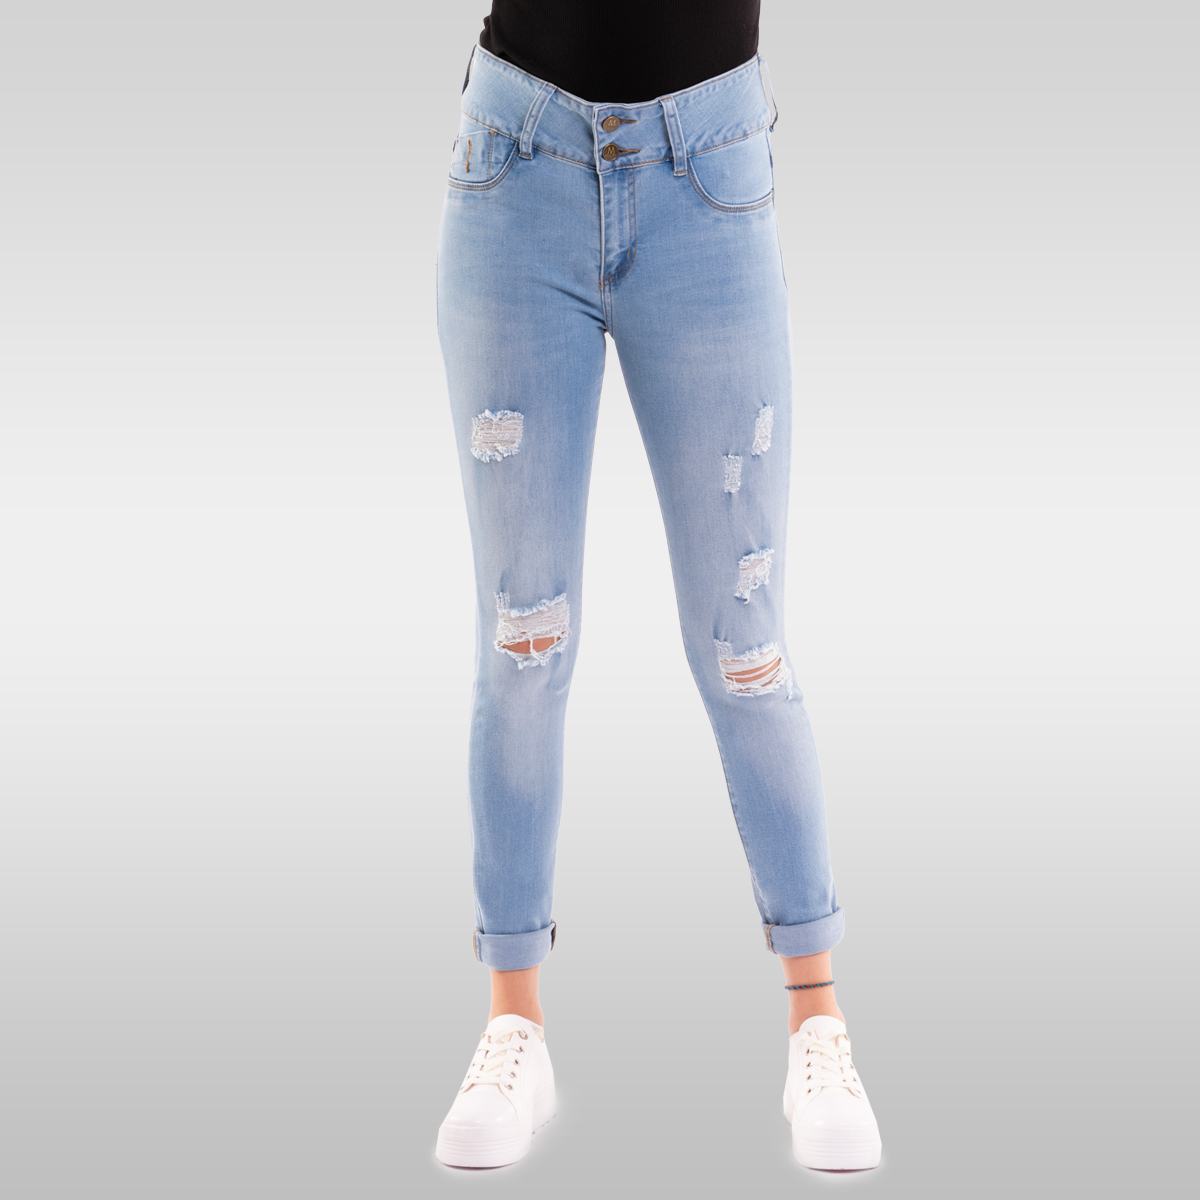 Jeans Push-up - Jeans - Pantalones - ROPA - Mujer 